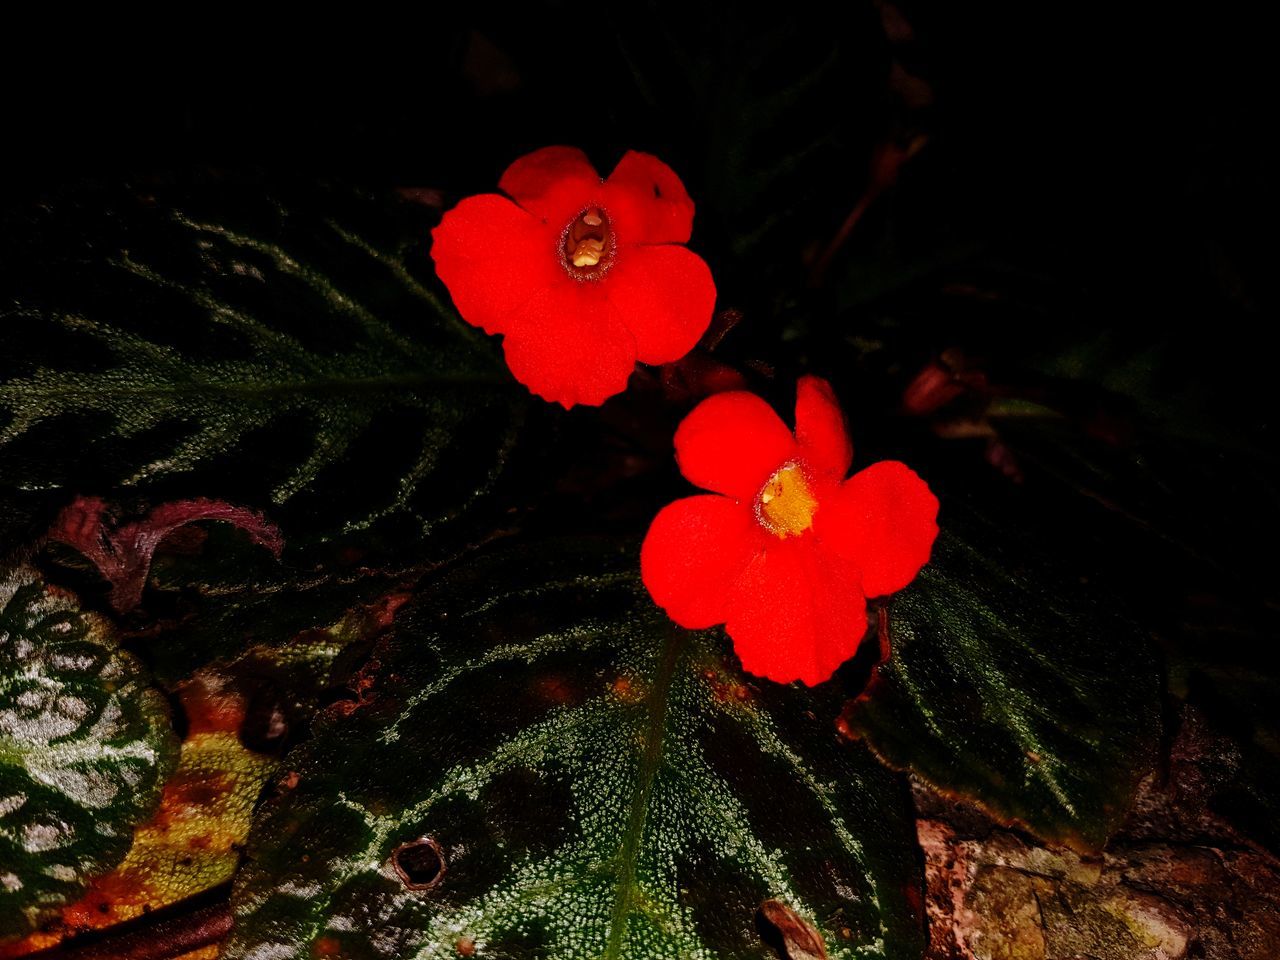 plant, growth, close-up, no people, beauty in nature, flower, flowering plant, nature, night, red, leaf, petal, plant part, flower head, freshness, green color, inflorescence, vulnerability, fragility, high angle view